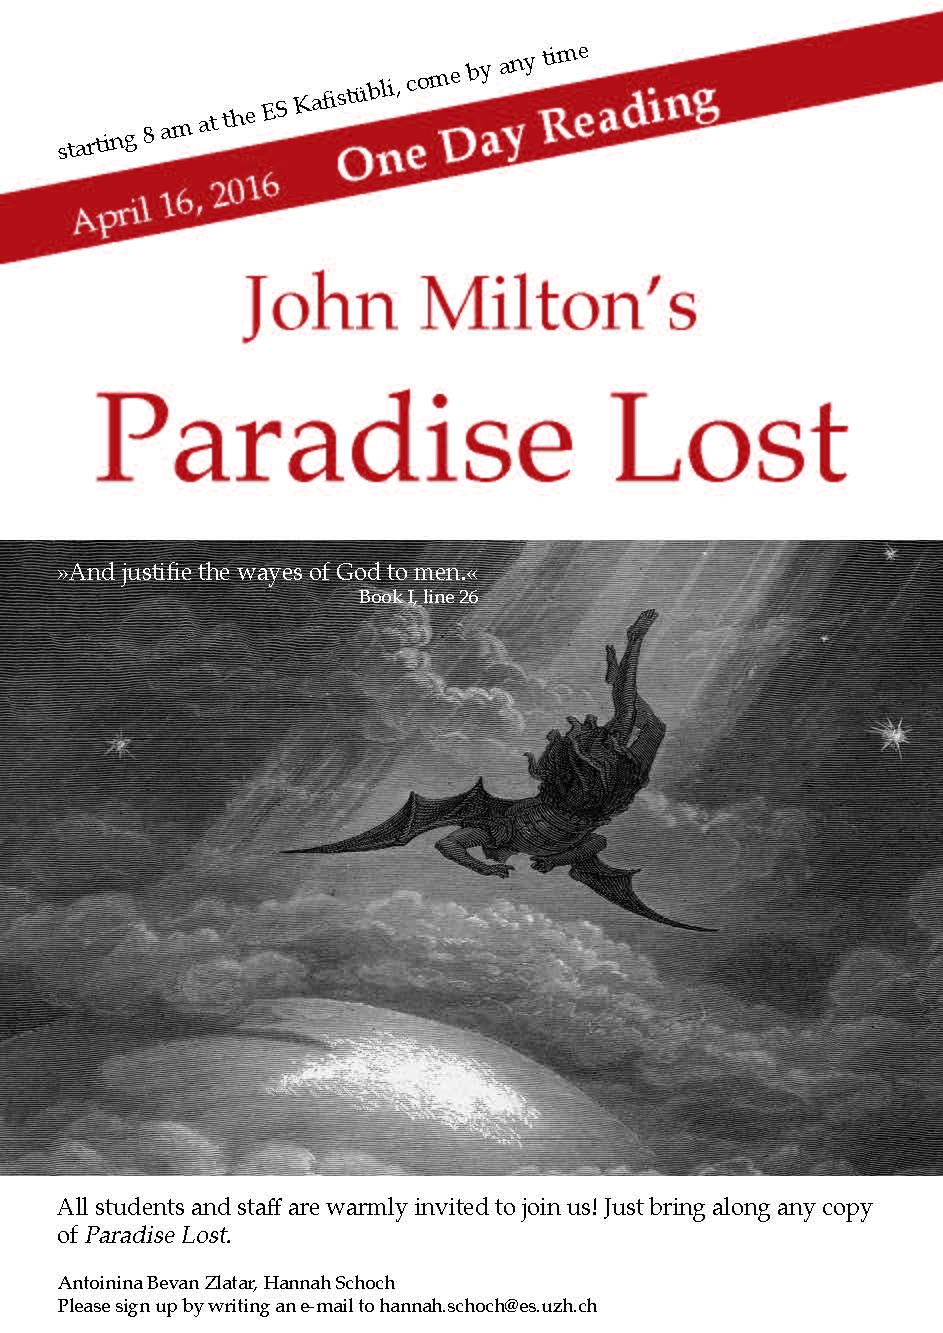 One-Day Reading of Paradise Lost